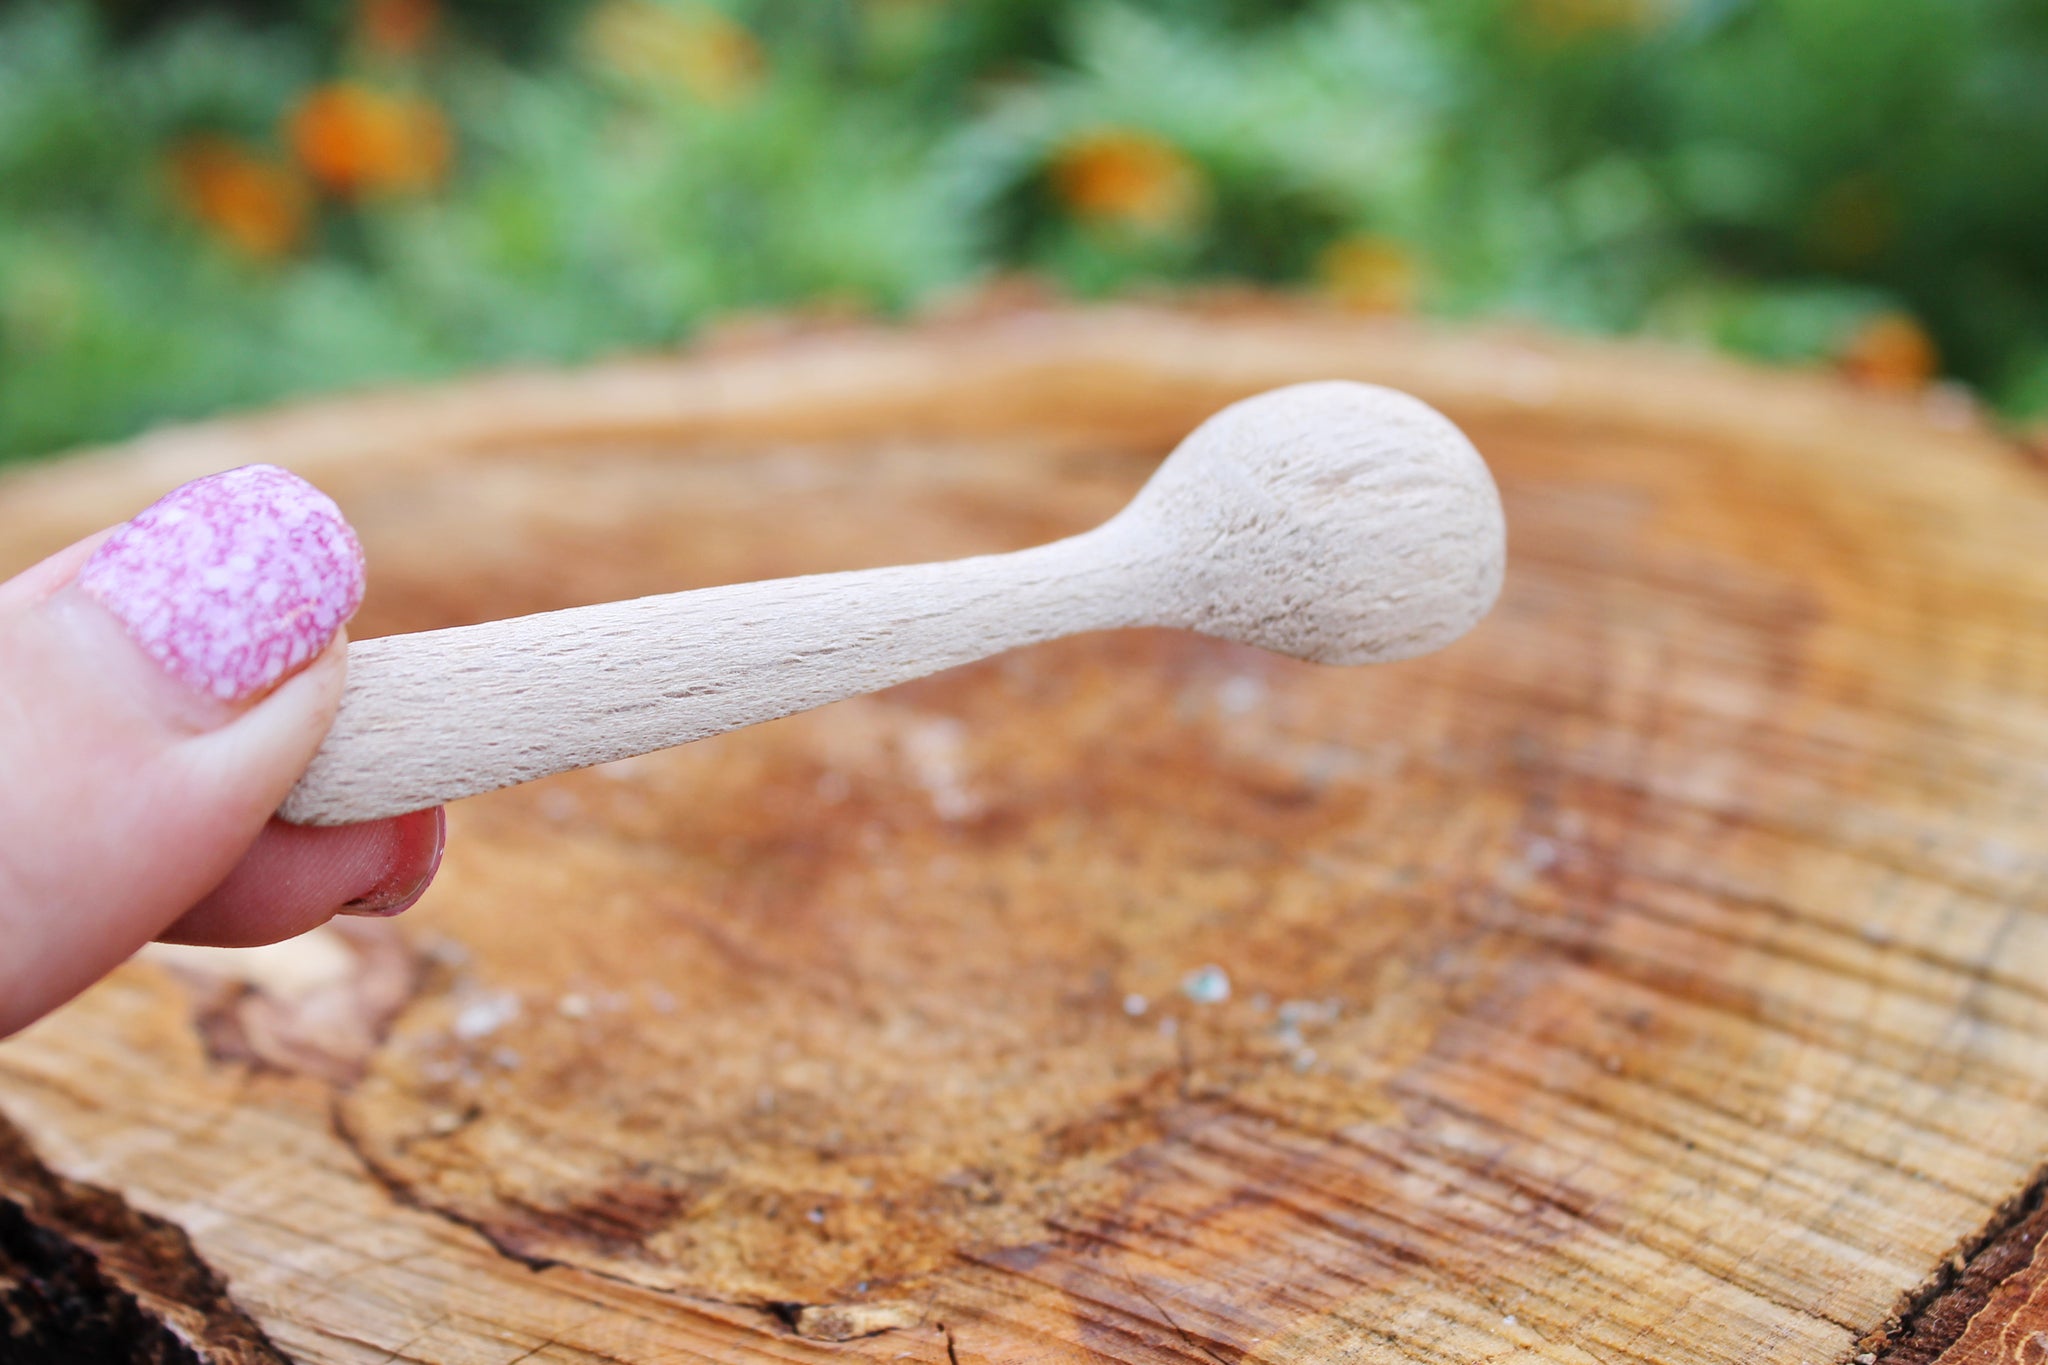 Set of 2 handmade small wooden mini spoons for spices - 3 inches - nat –  GeniusesOfWood